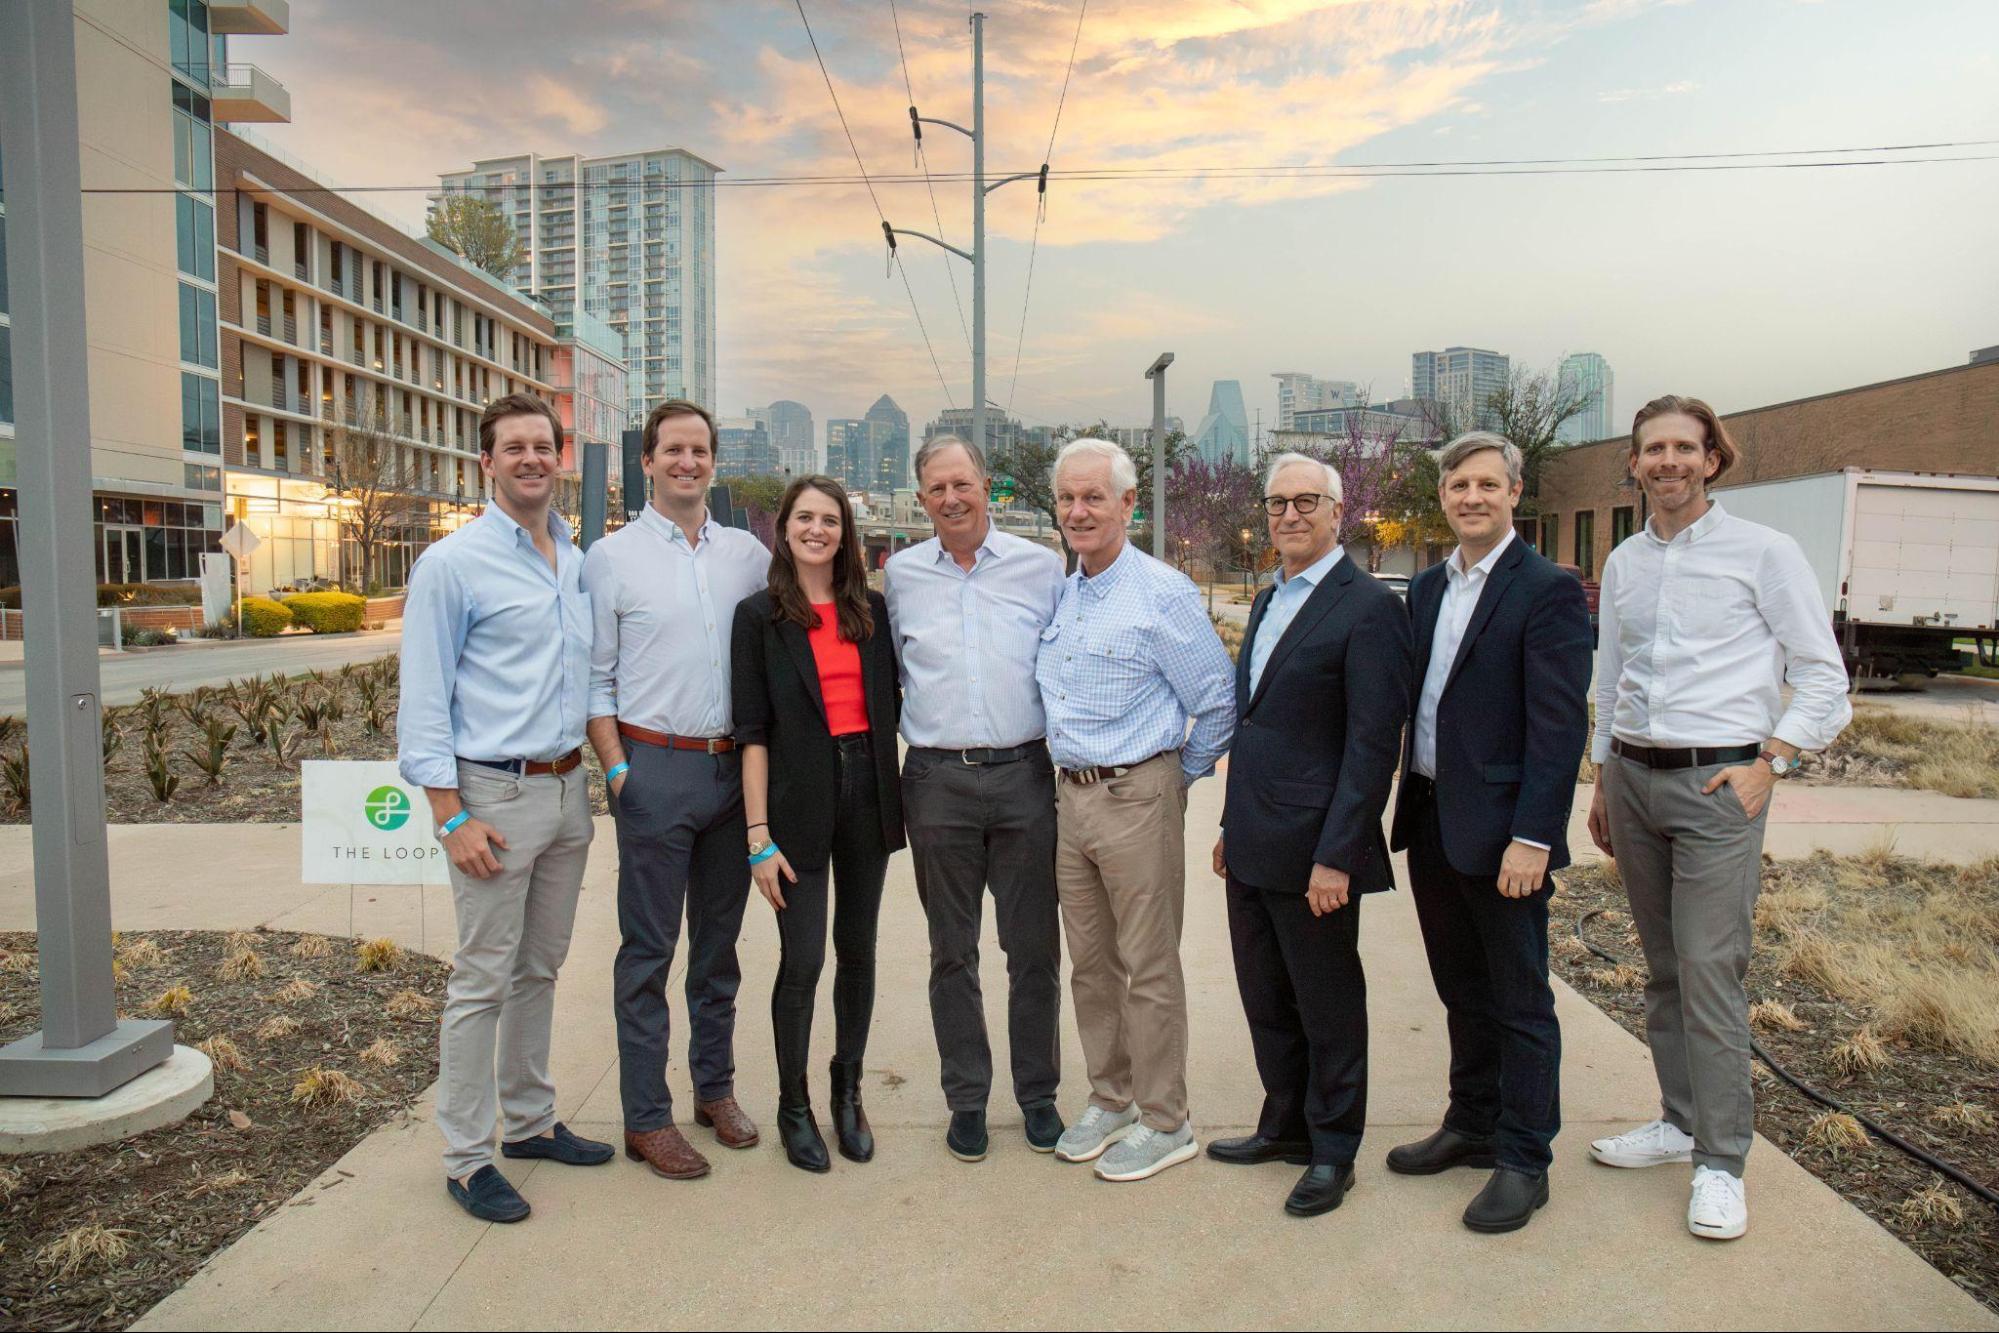 The Loop Dallas Announces a new Nasher Public partnership to enhance the placemaking of the new Hi Line Connector trail with public art